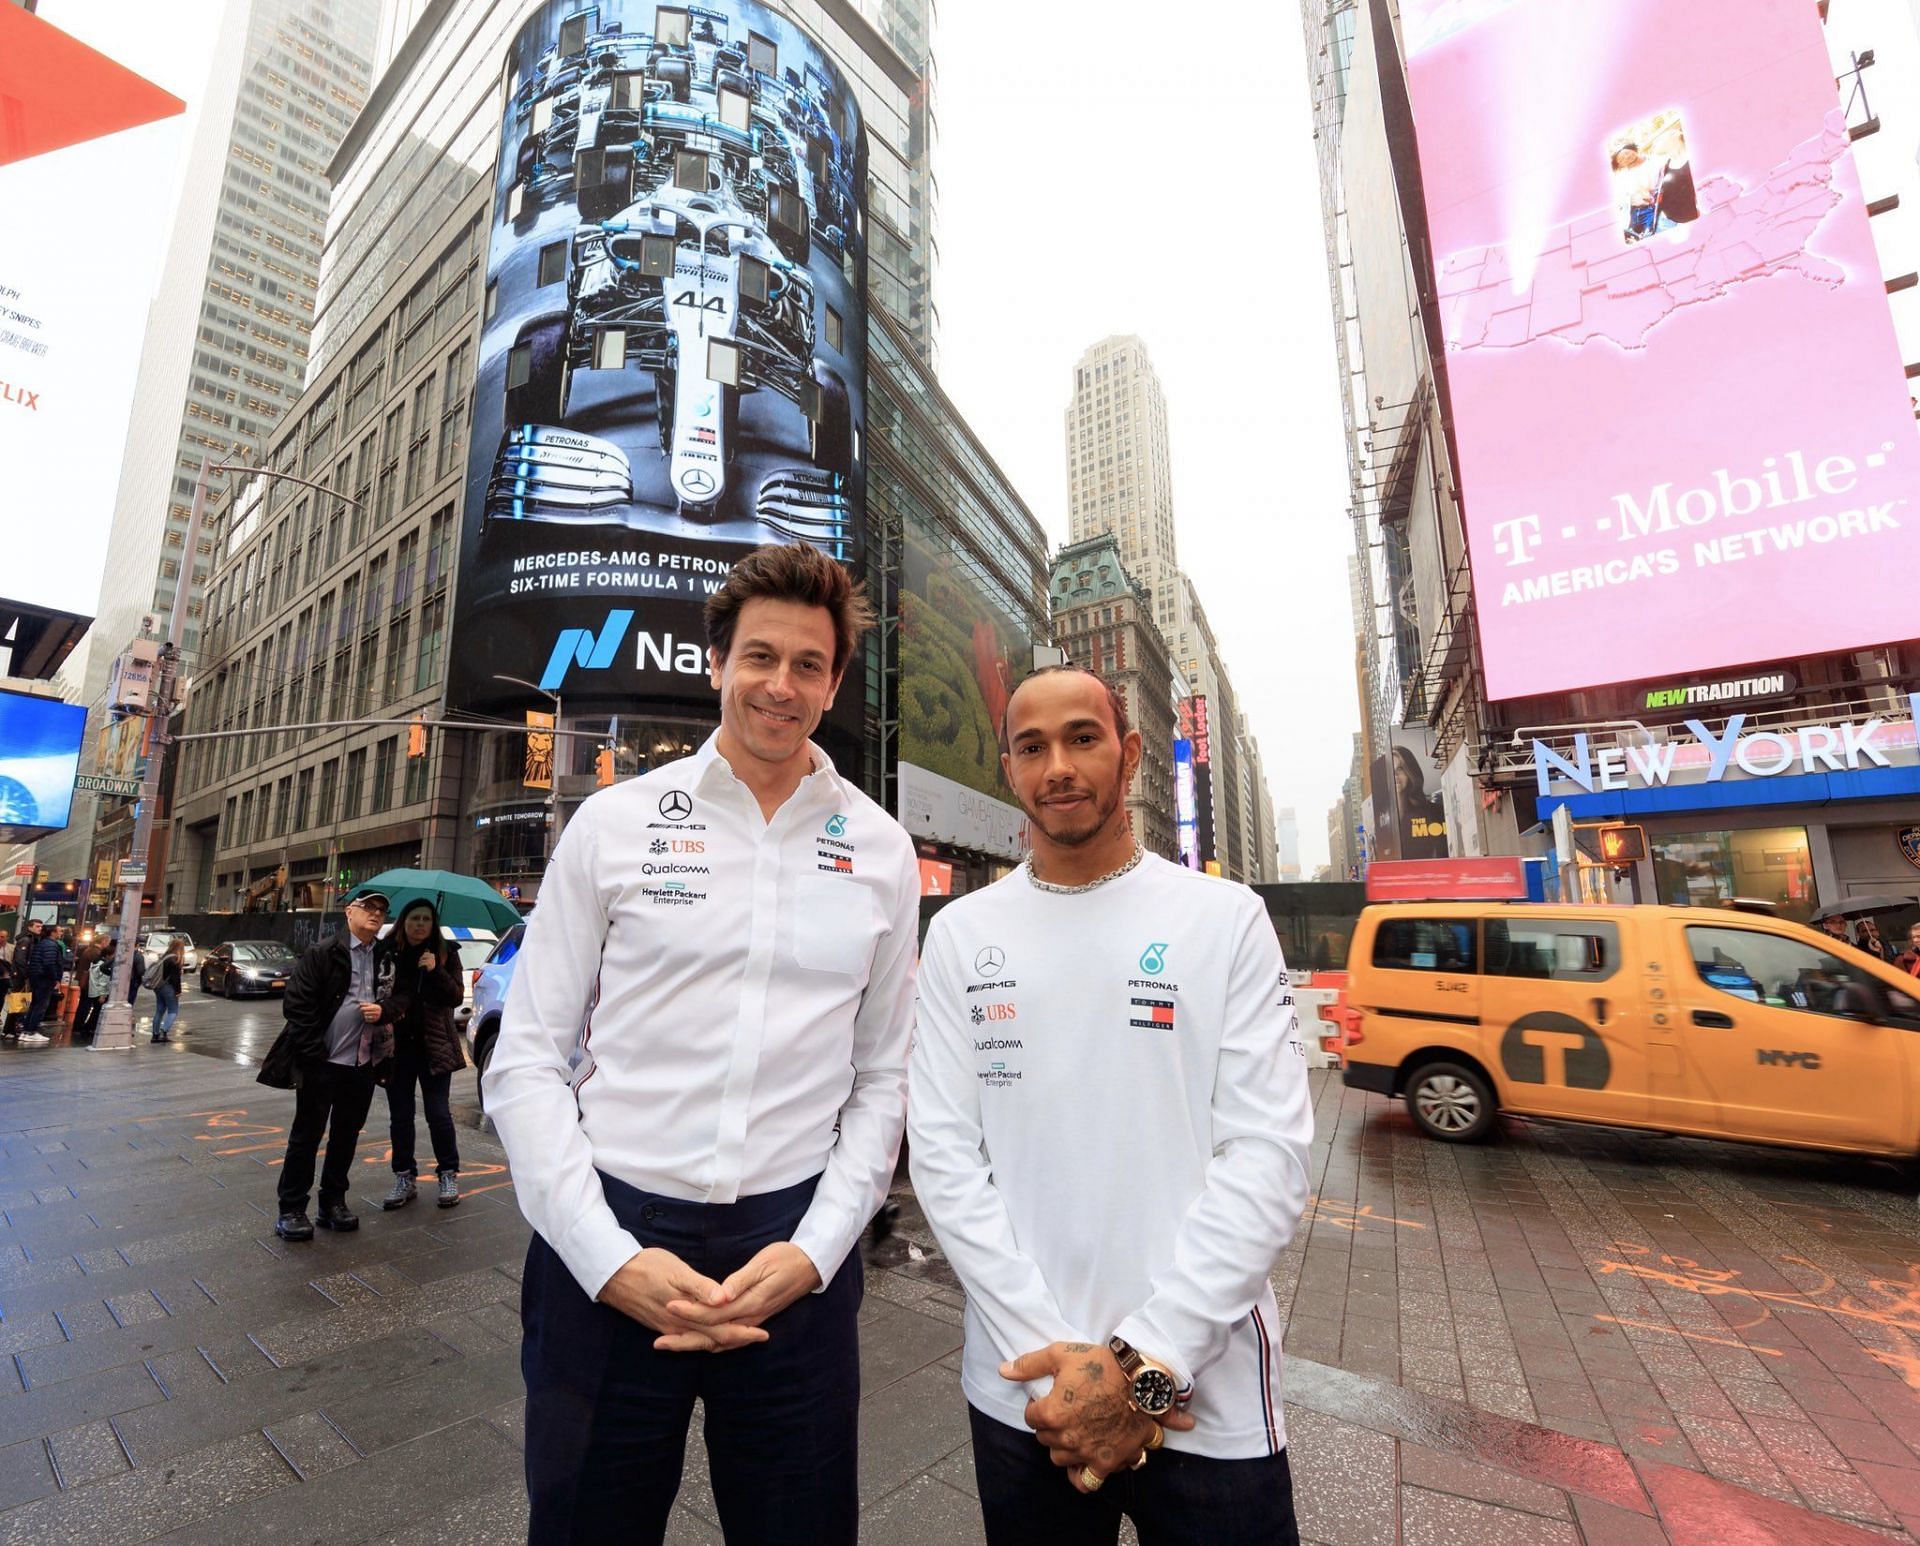 Lewis Hamilton and Toto Wolff at the Mercedes Benz Motorsport CEO Forum in New York City. Source: Twitter/@MercedesAMGF1